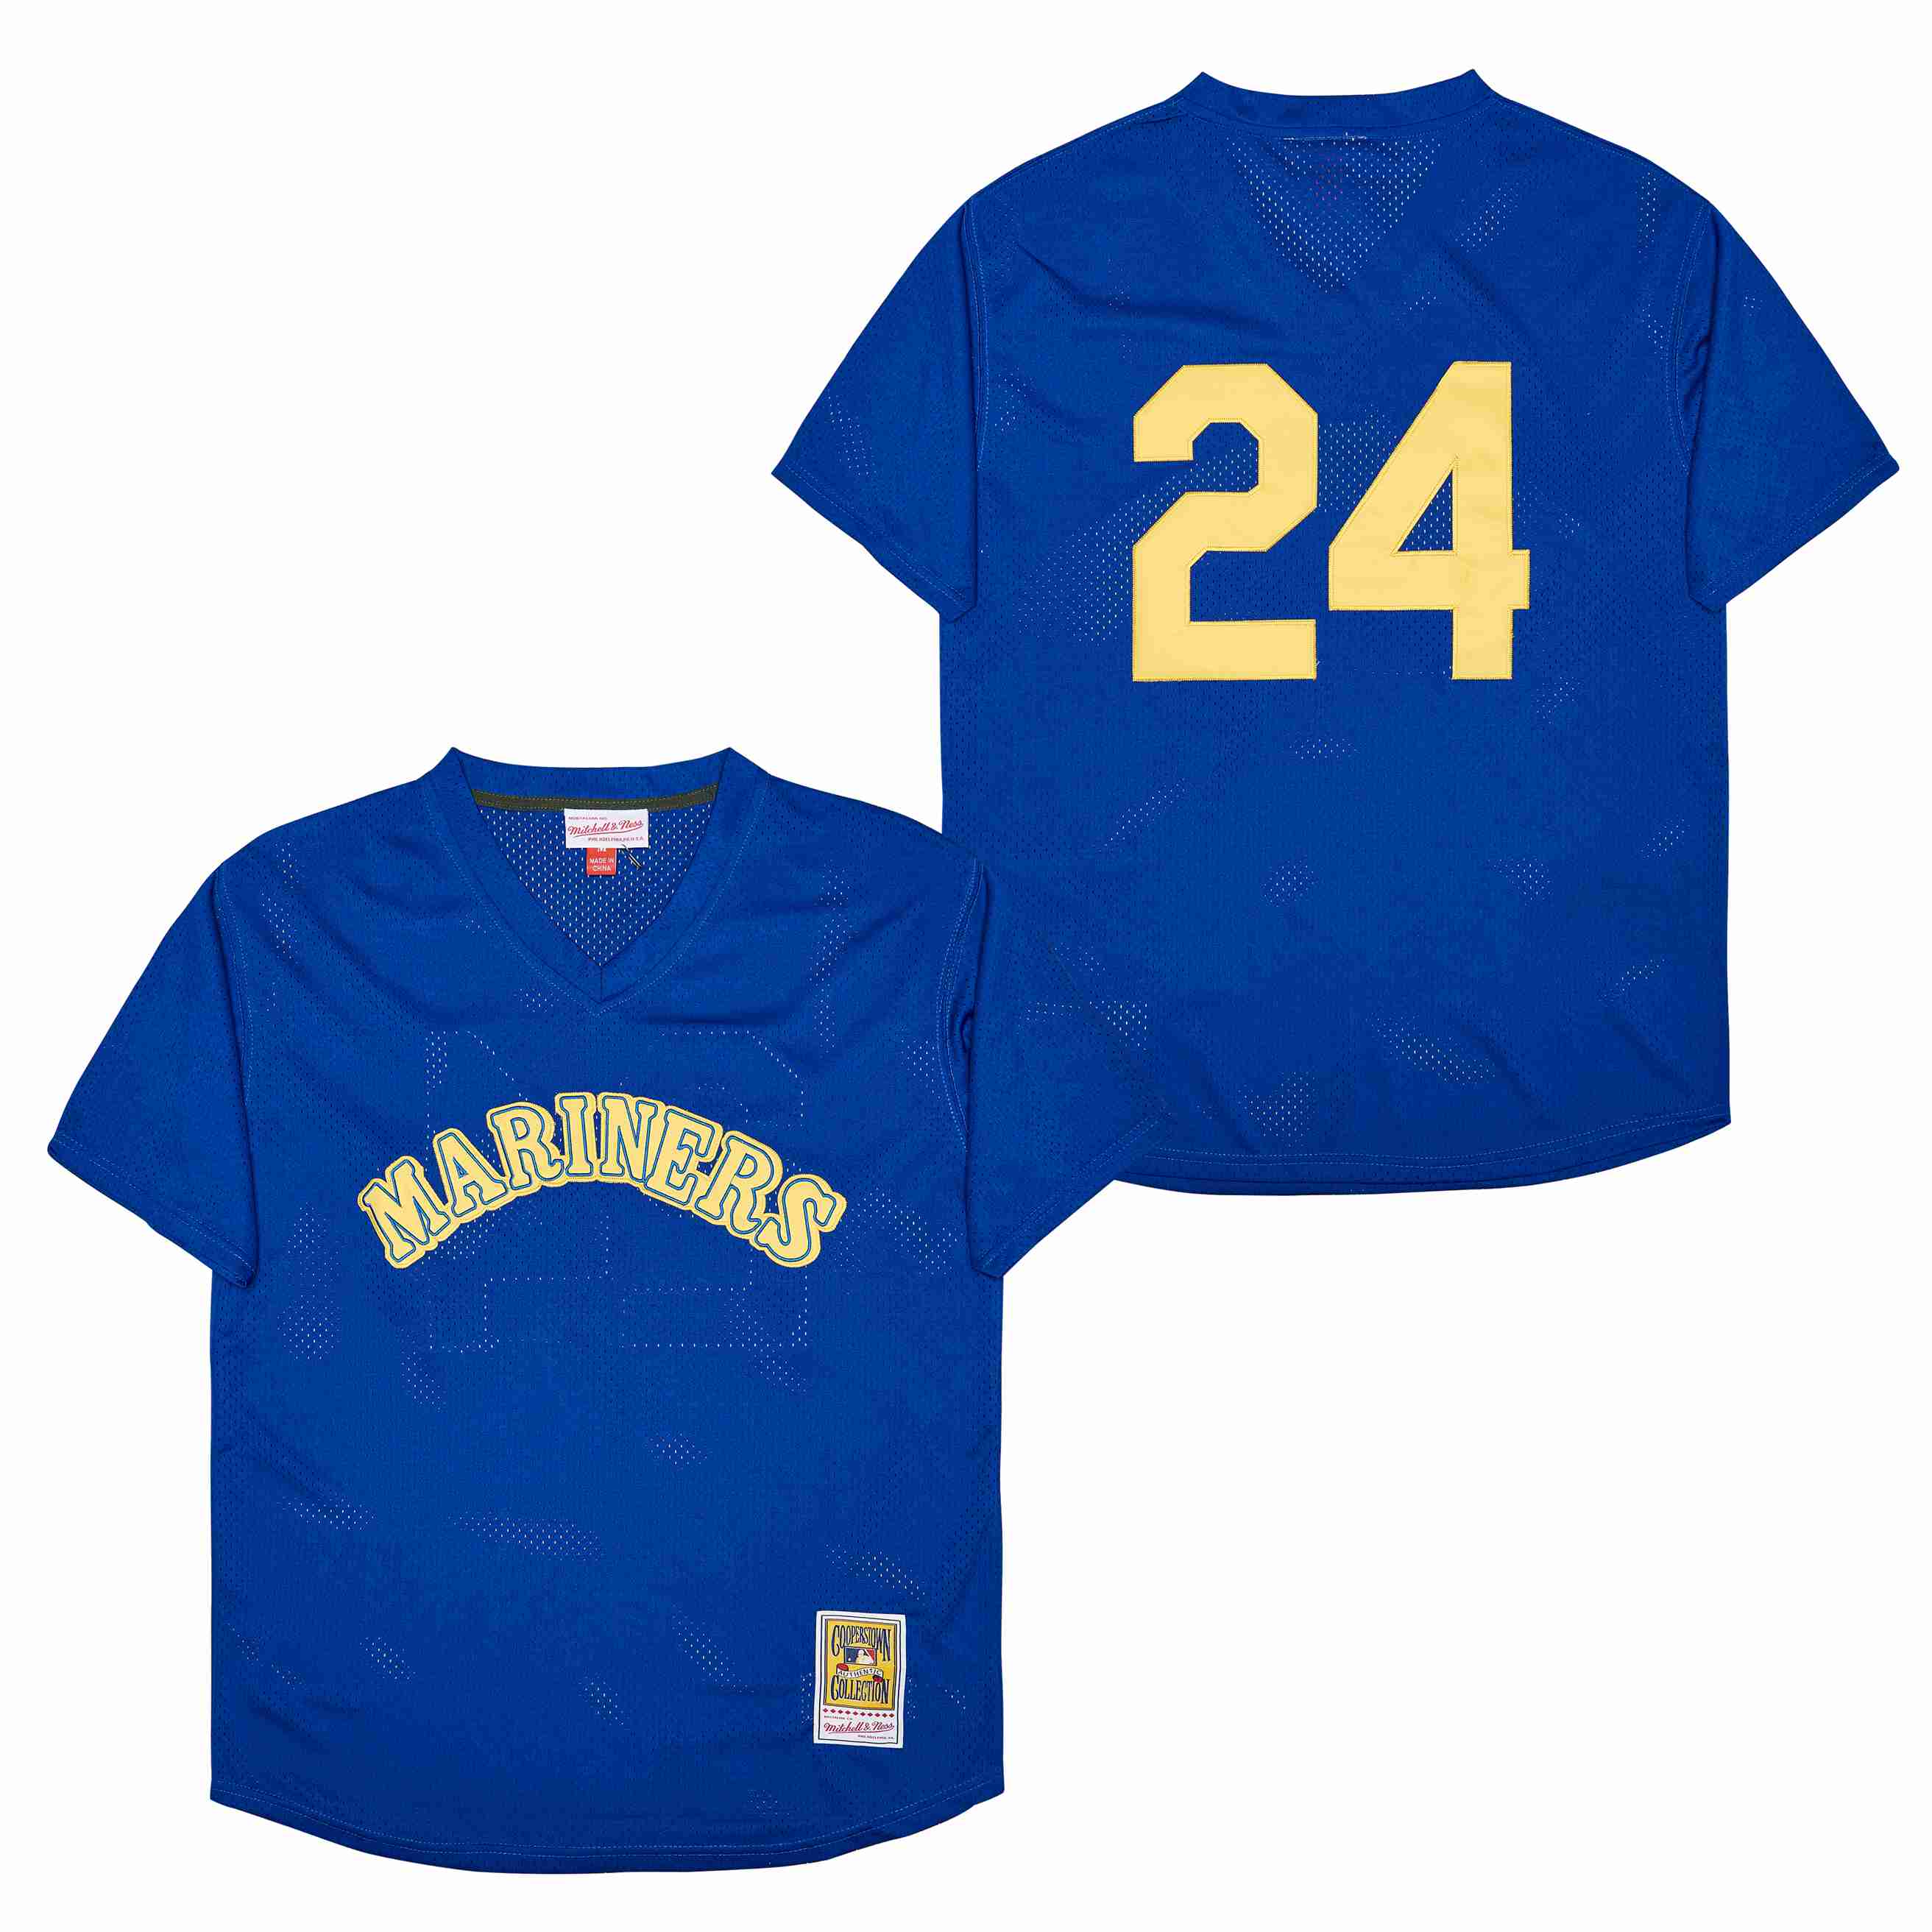 Men Seattle Mariners #24 Griffey blue Throwback Game MLB Jersey->los angeles lakers->NBA Jersey